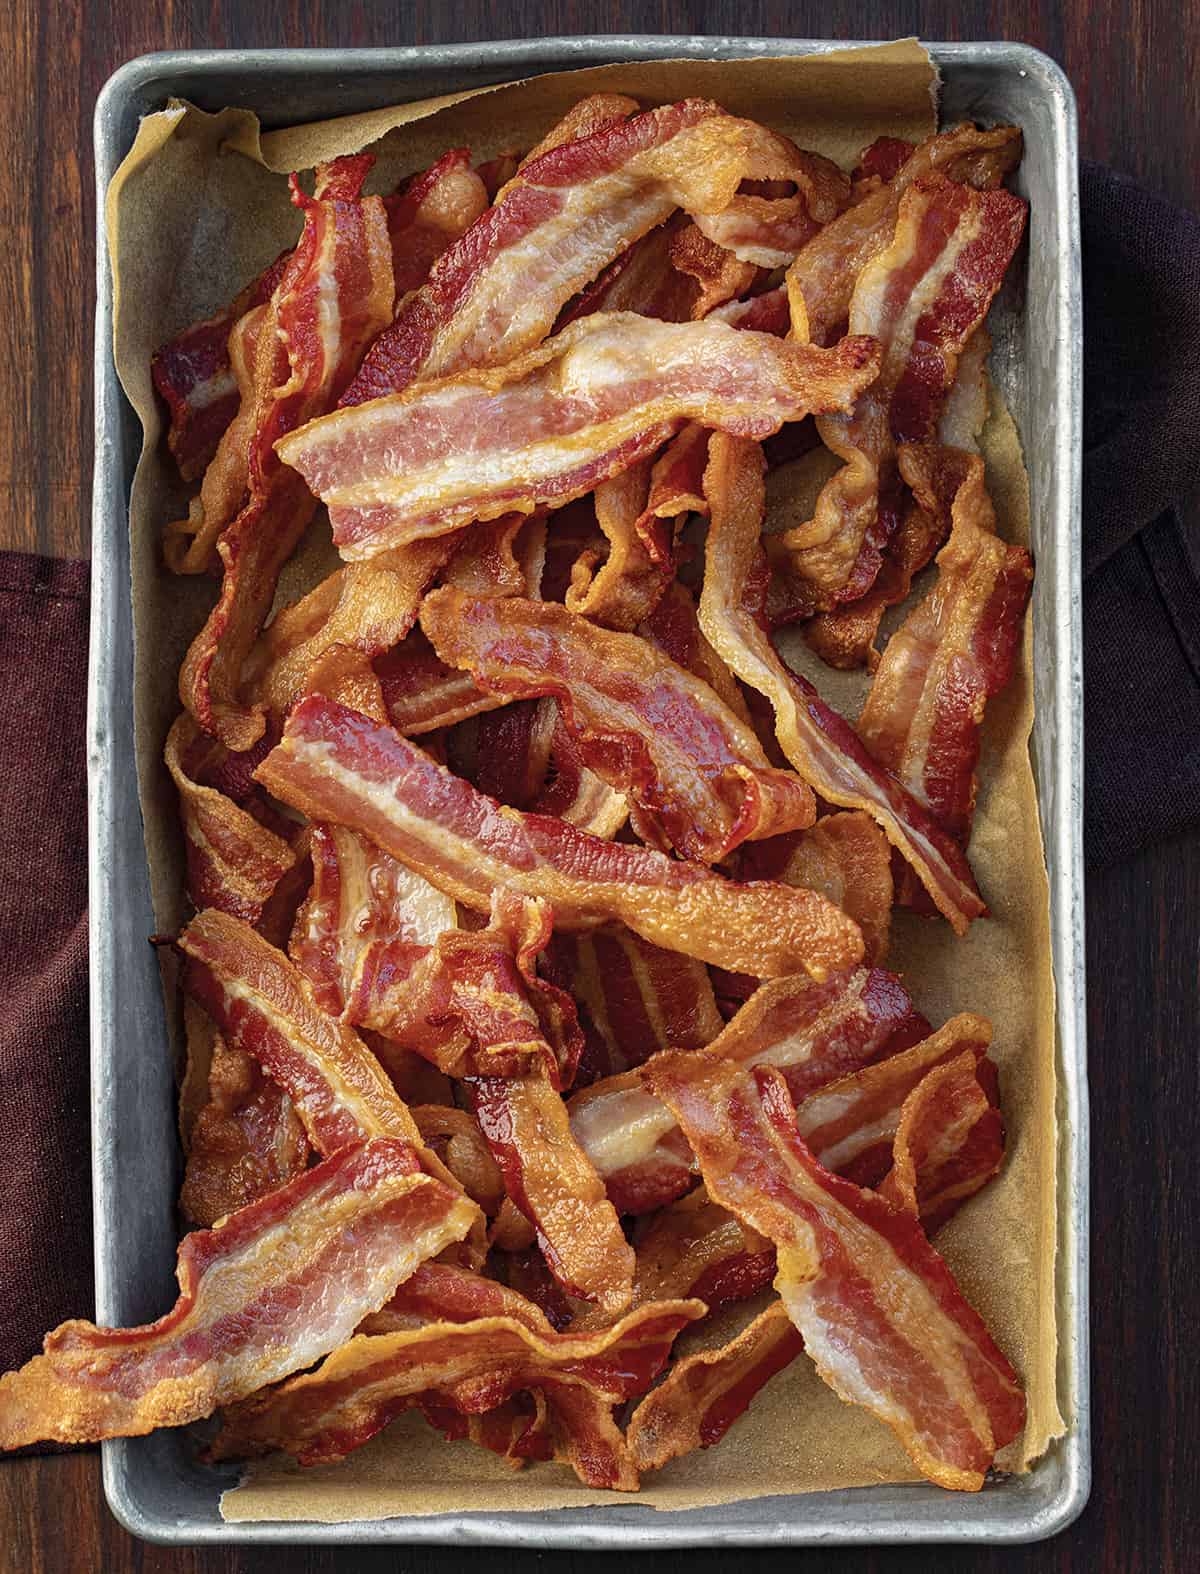 Pan of Crispy Air Fried Bacon. Side Dish, How to Make Bacon, Crispy Bacon, Air Fryer Recipes, Breakfast, Breakfast bacon, Easy Bacon, Quick Bacon, i am homesteader, iamhomesteader